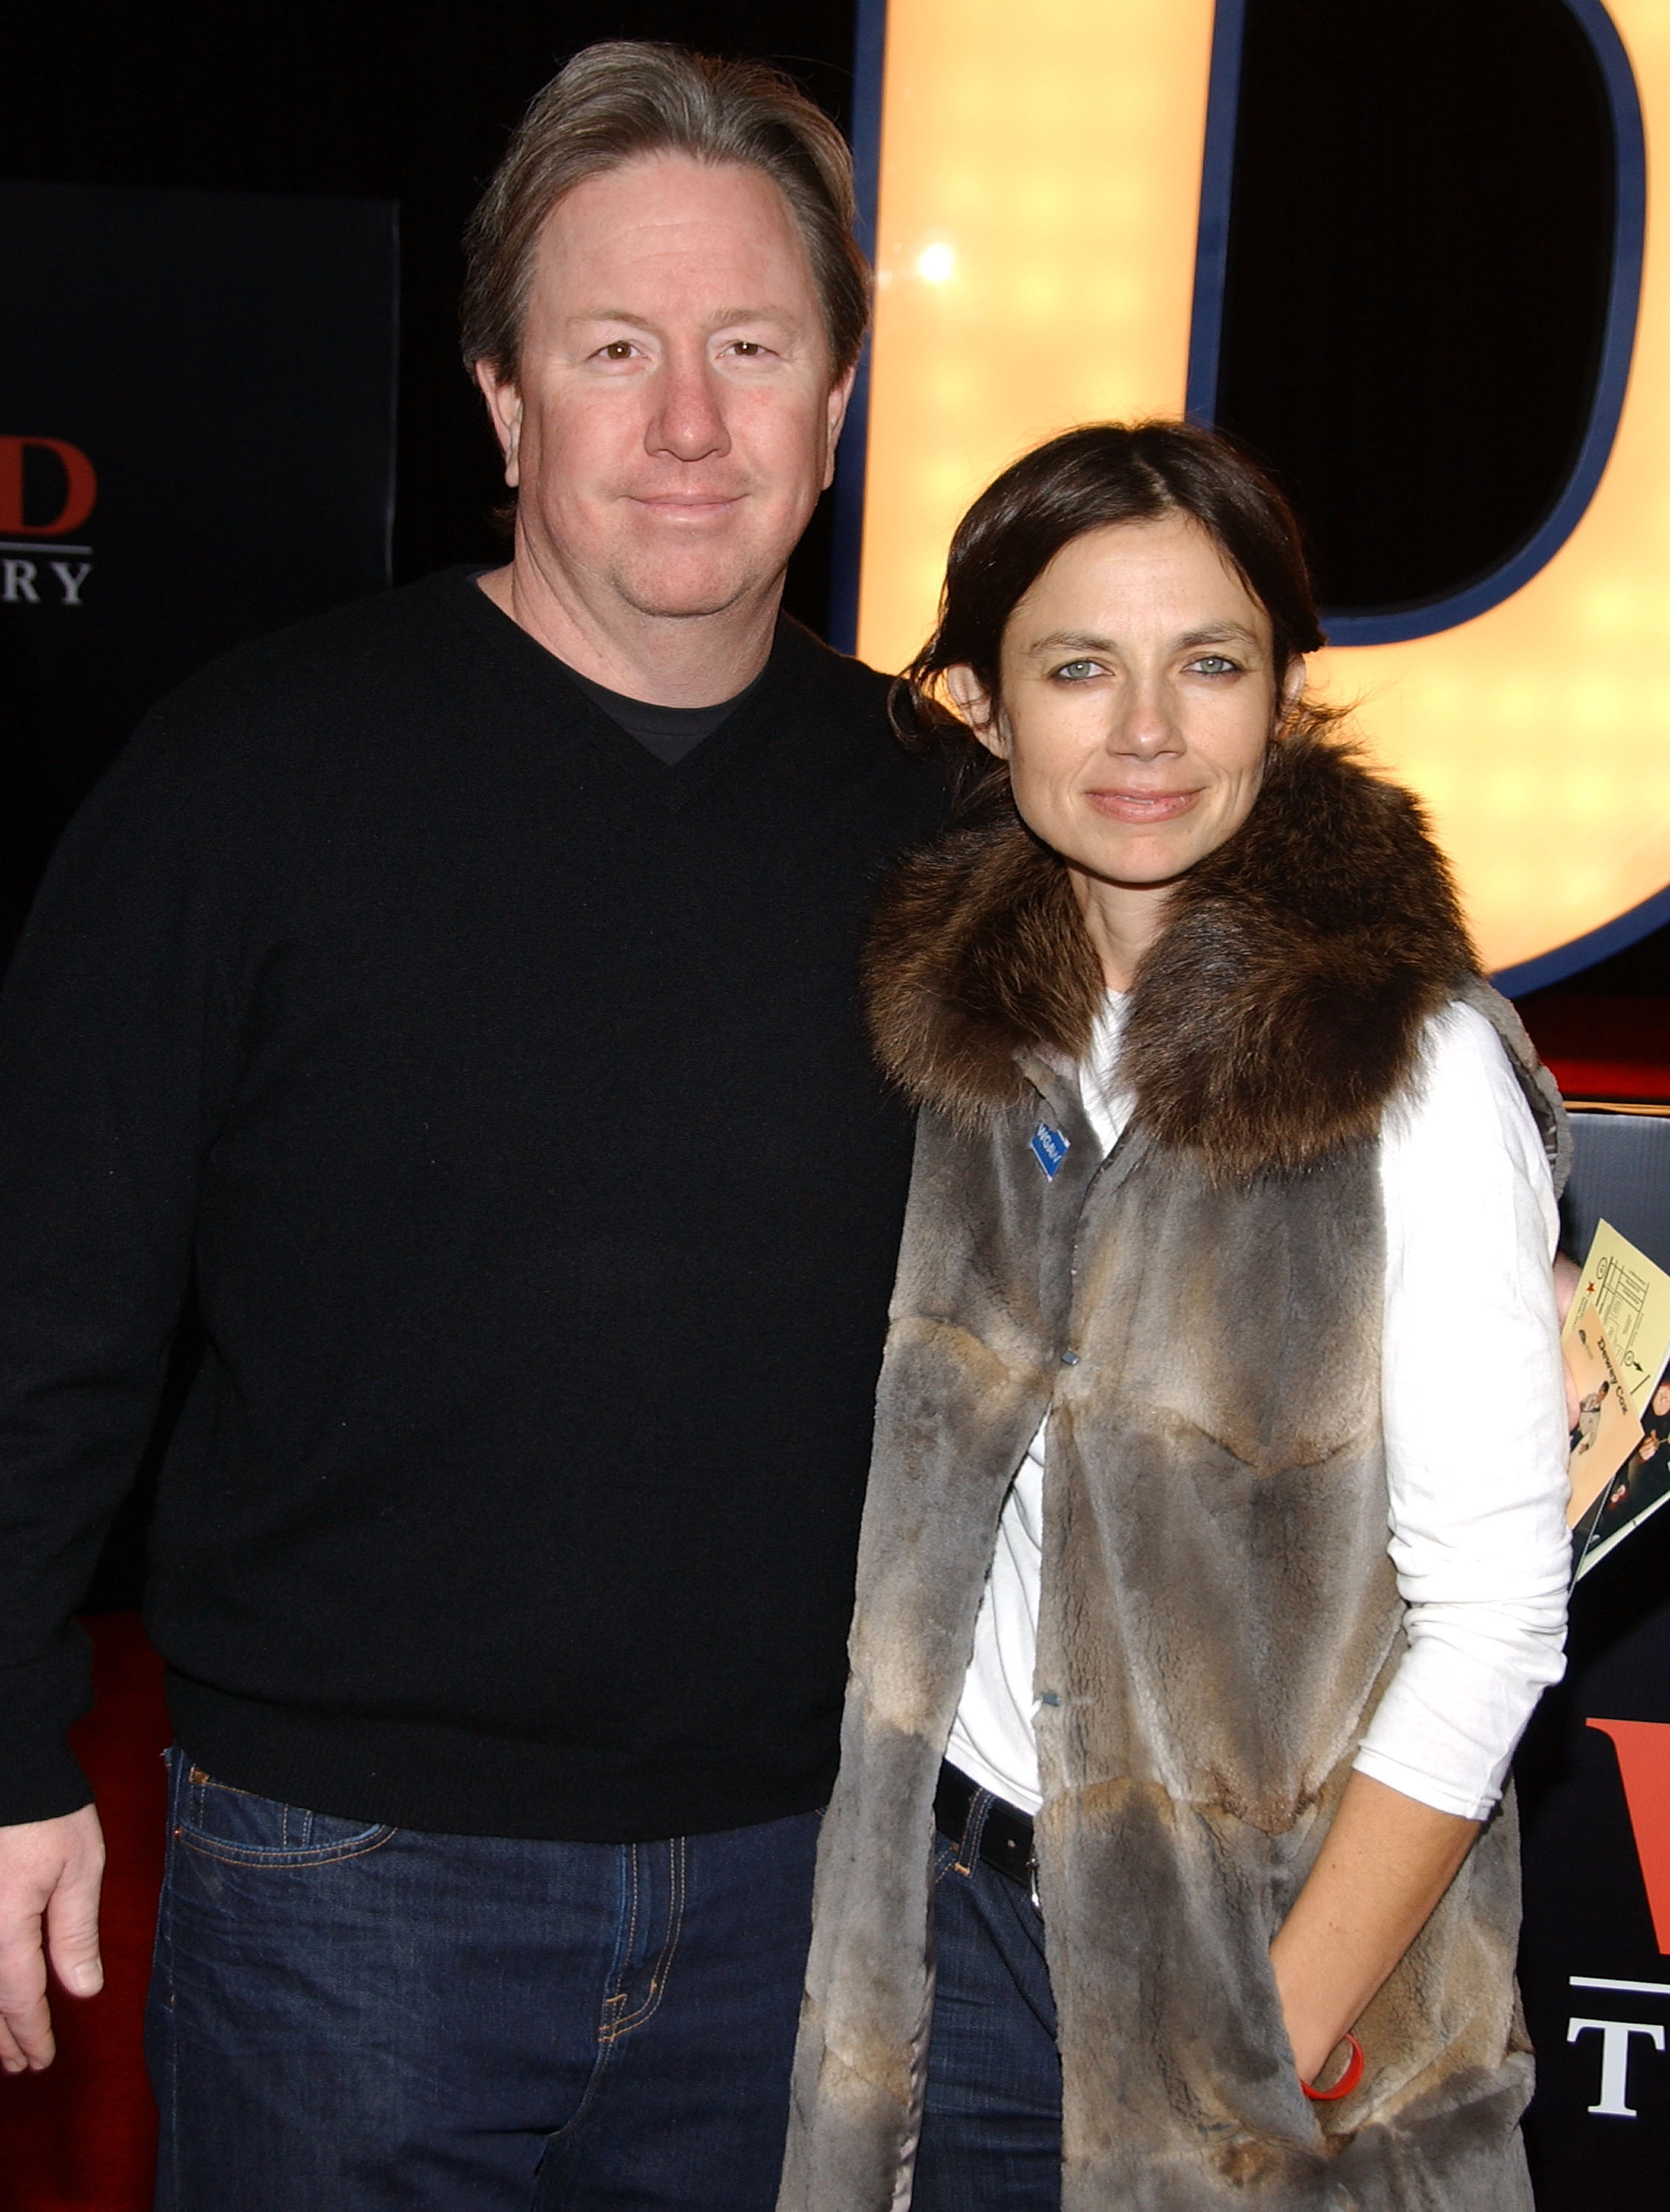 Mark Fluent and Justine Bateman on December 12, 2007 in Hollywood, California | Source: Getty Images